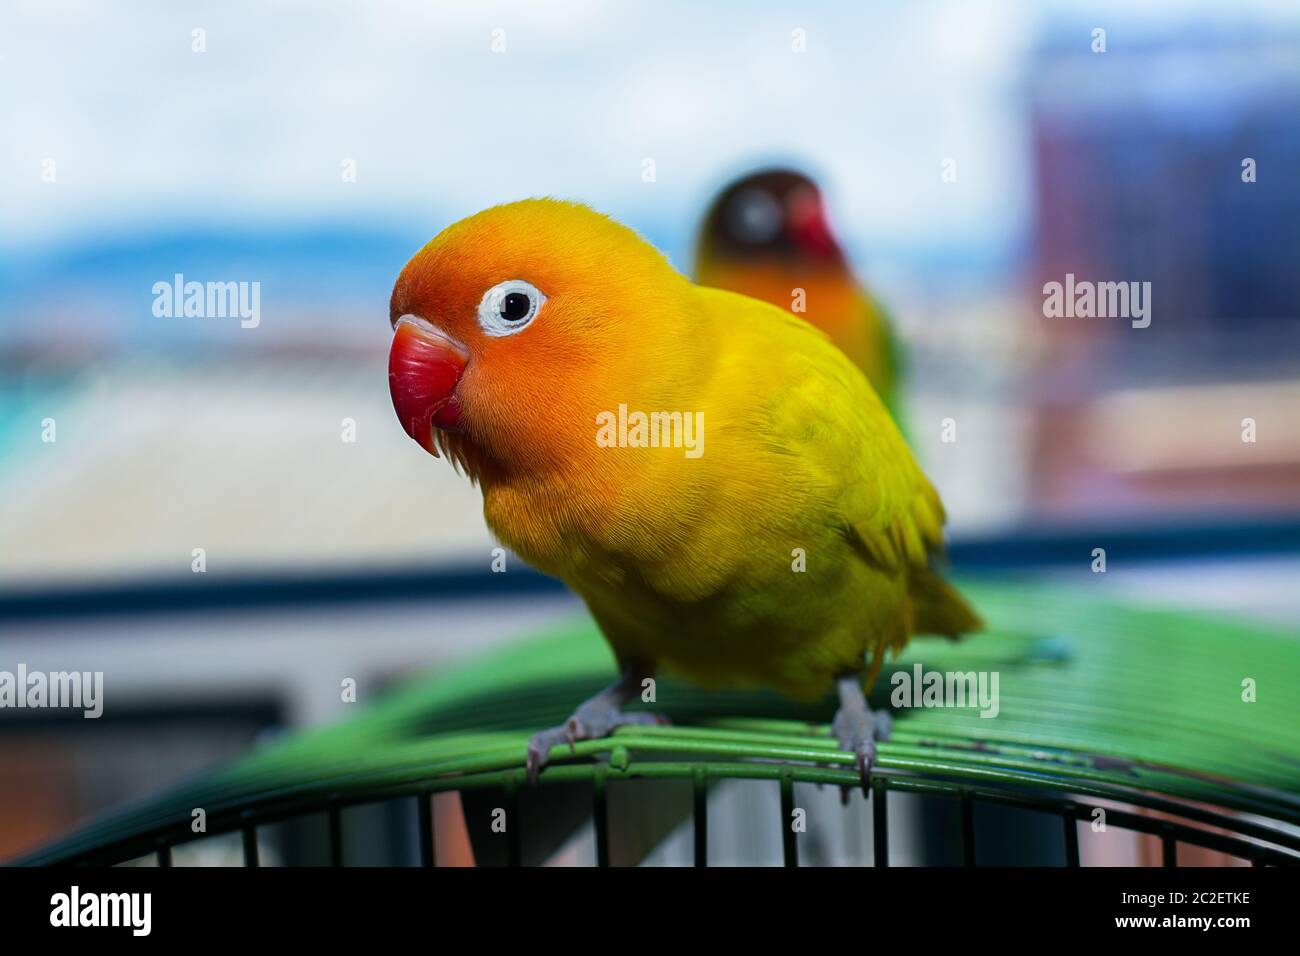 Cute domestic yellow lovebird. This lovebird is in cage. Stock Photo